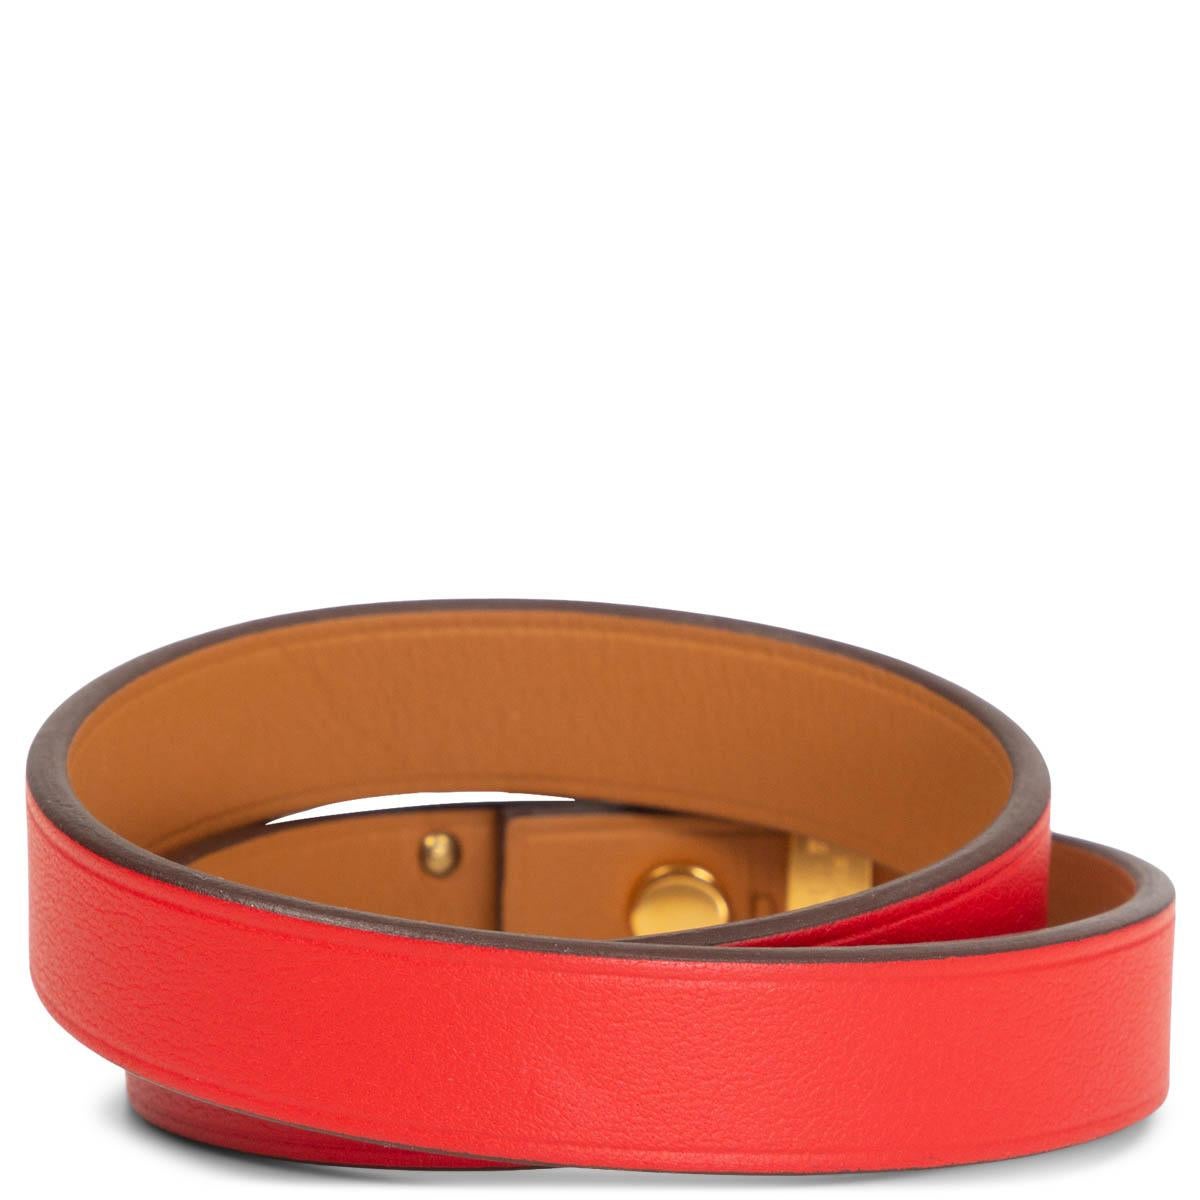 100% authentic Hermès Mini Dog Double Tour Bracelet in Rouge de Coeur Veau Swift leather in size T2 with gold-tone hardware. Brand new. No Box.

Measurements
Tag Size	T2
Width	1cm (0.4in)
Length	35cm (13.7in)
Hardware	Gold-Tone

All our listings